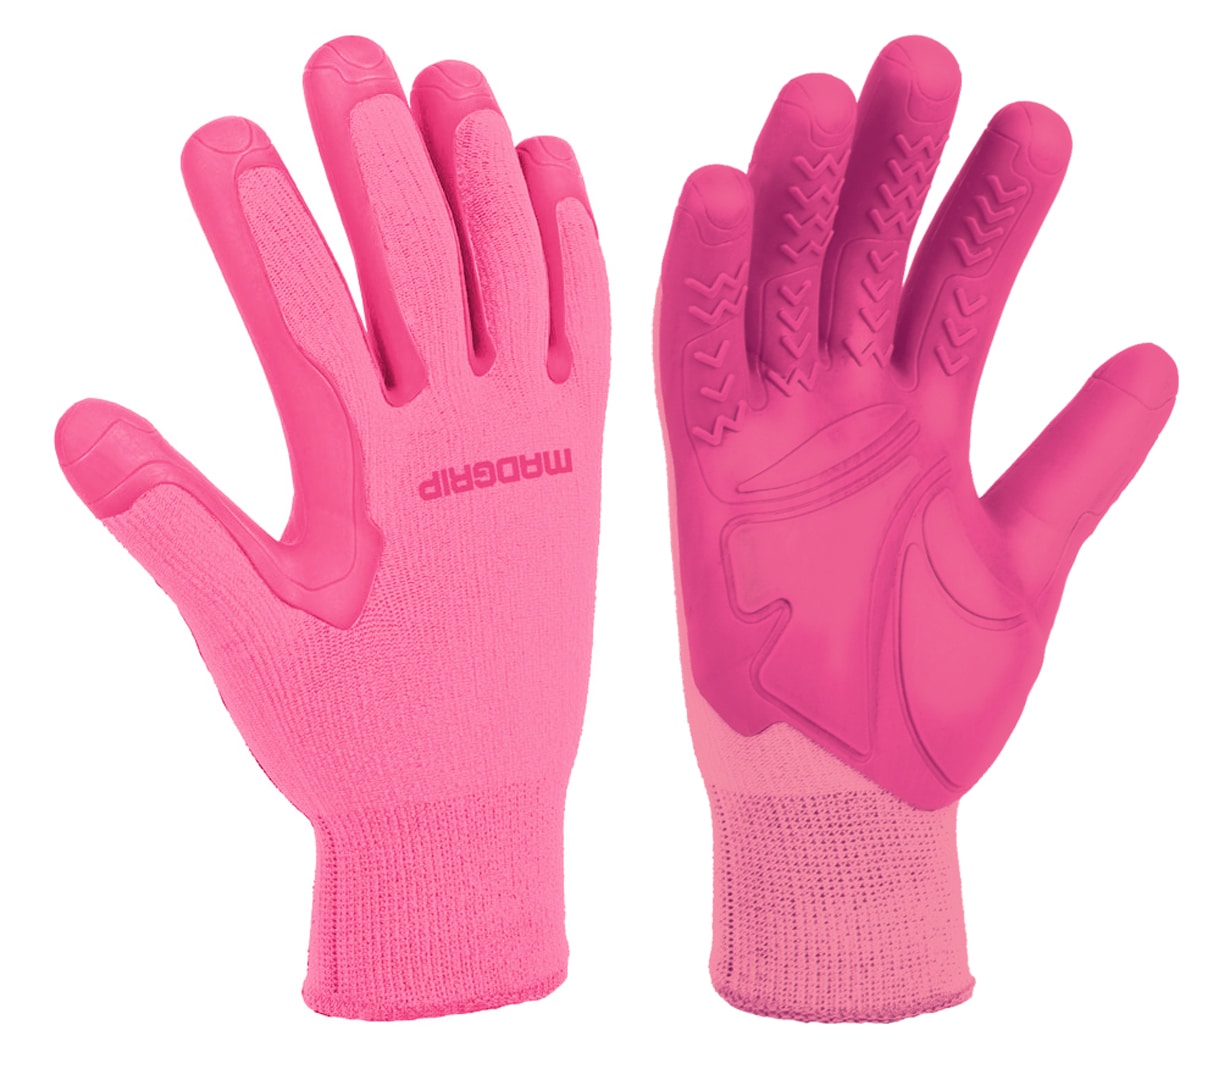 Mad Grip Unisex Pro Palm Rubber Gloves, X-small at